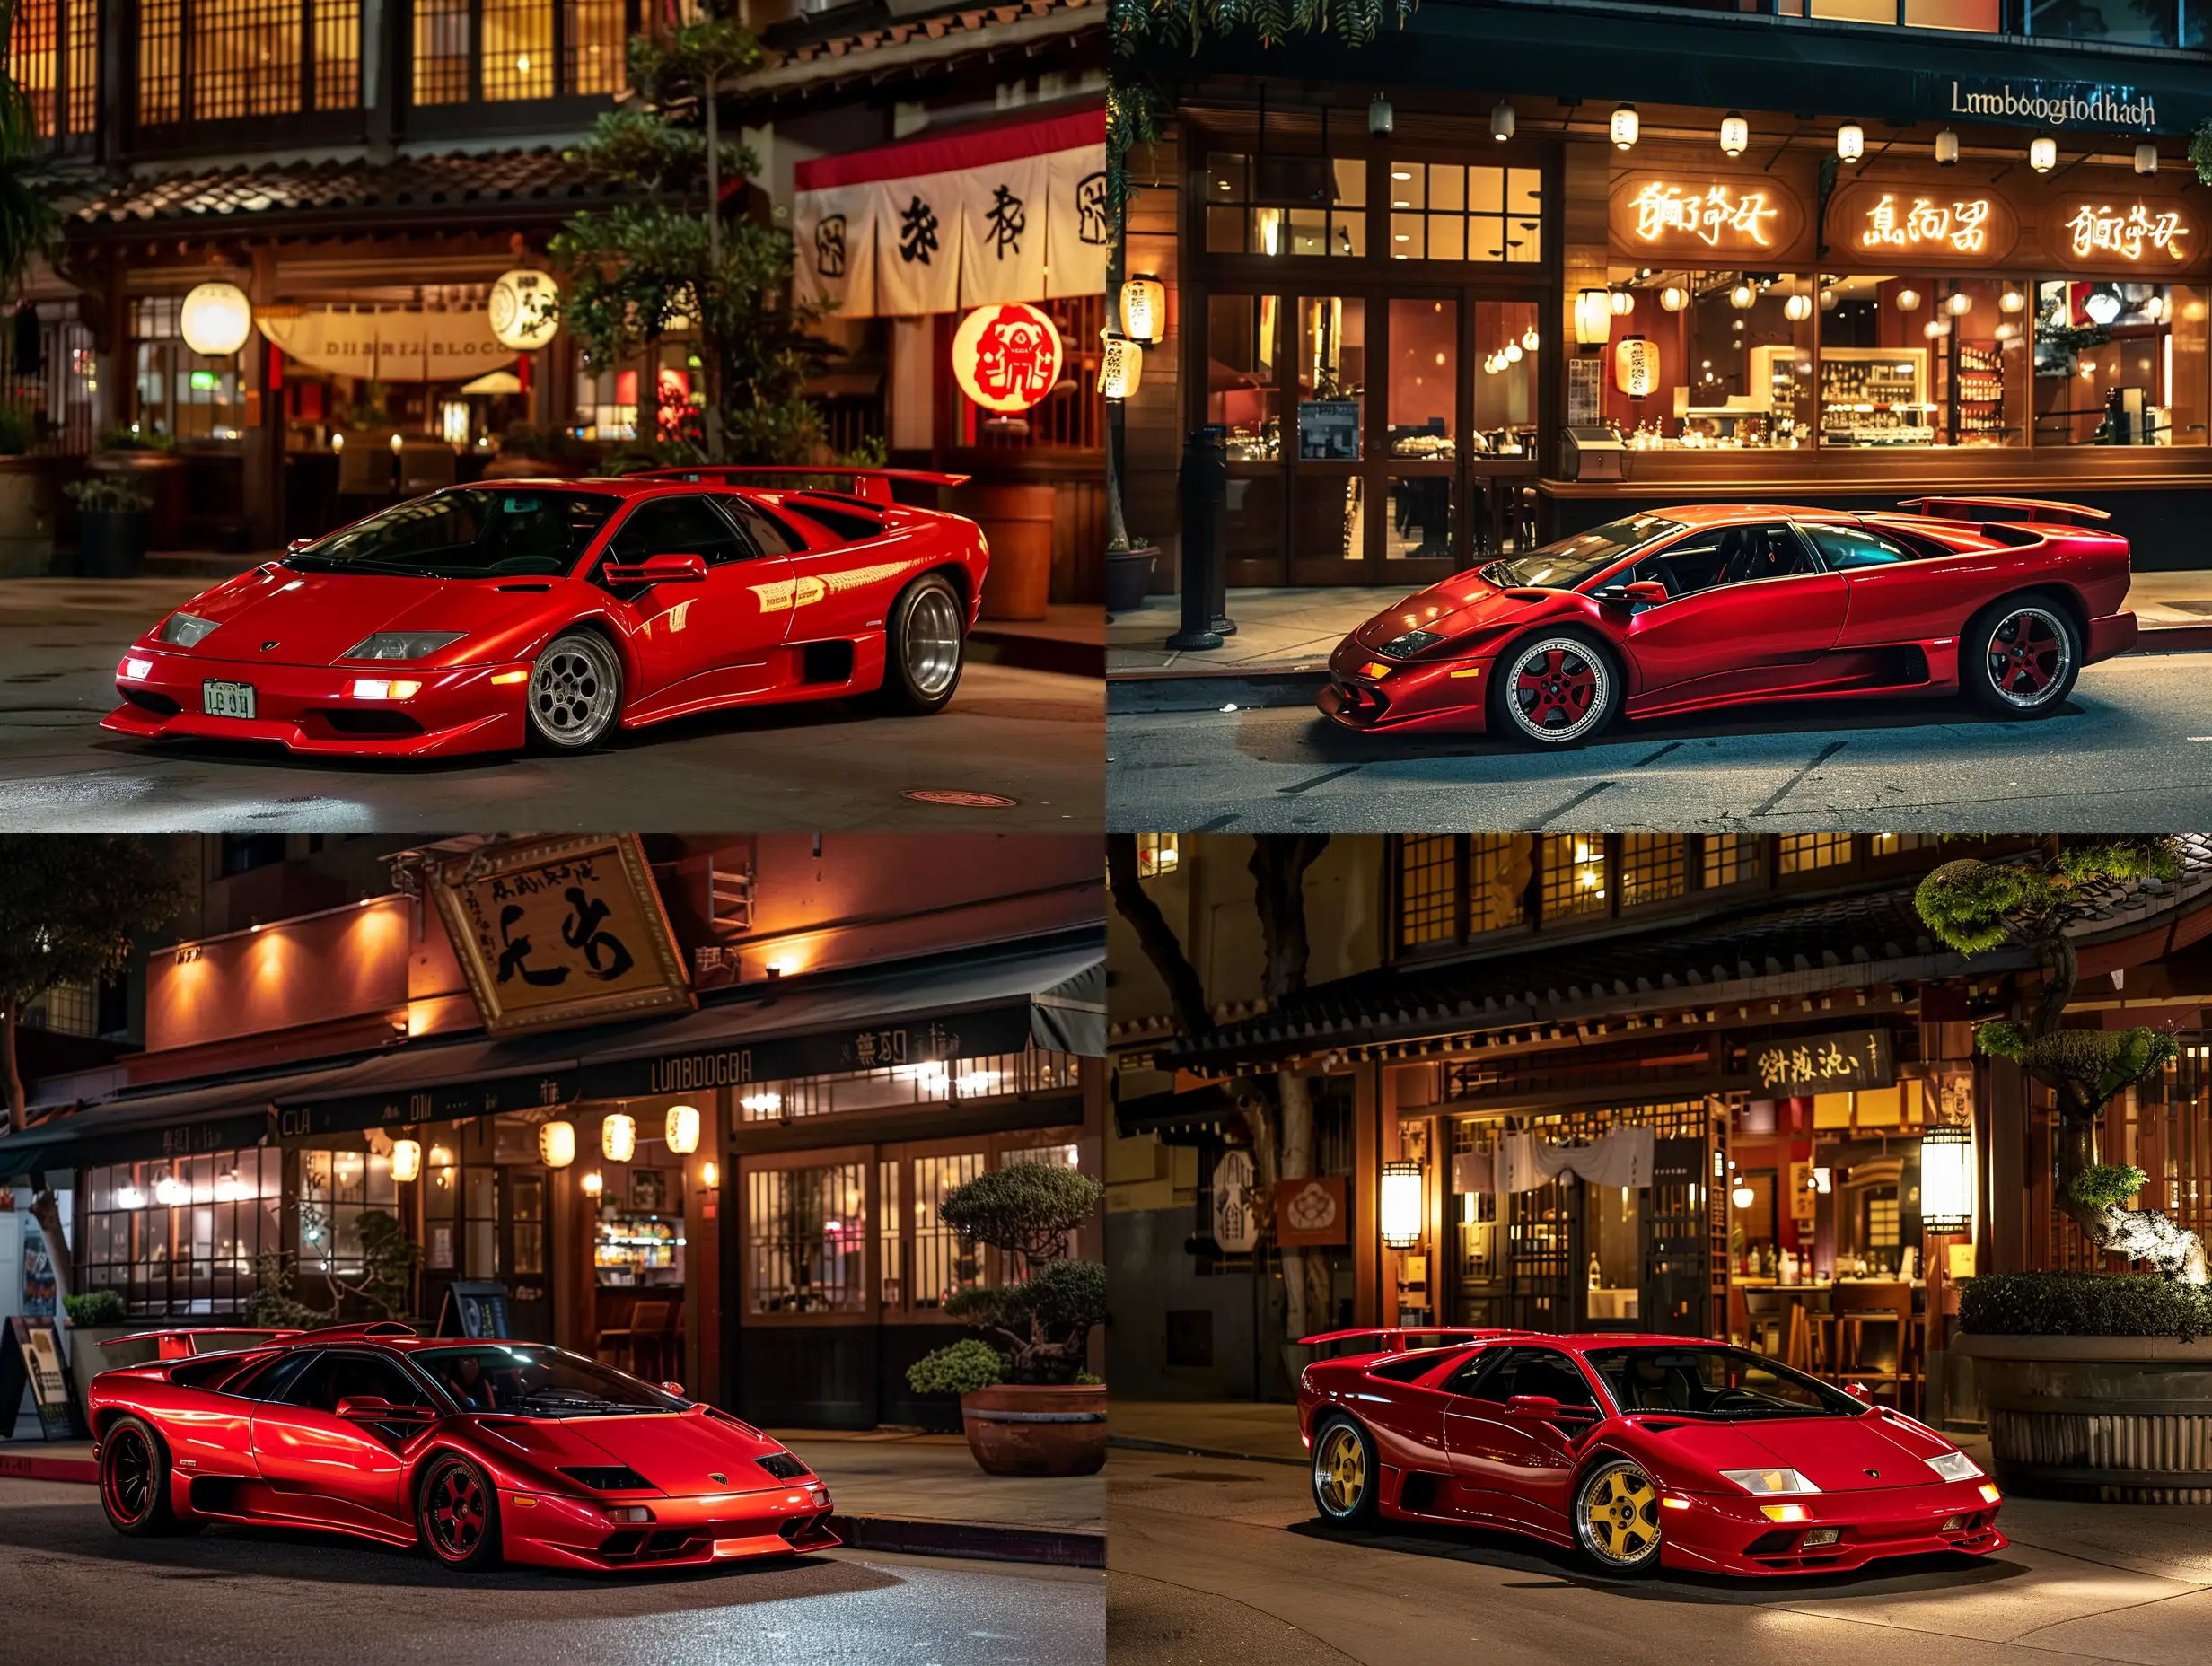 Red-Lamborghini-Diablo-Parked-Outside-Japanese-Restaurant-in-Los-Angeles-at-Night